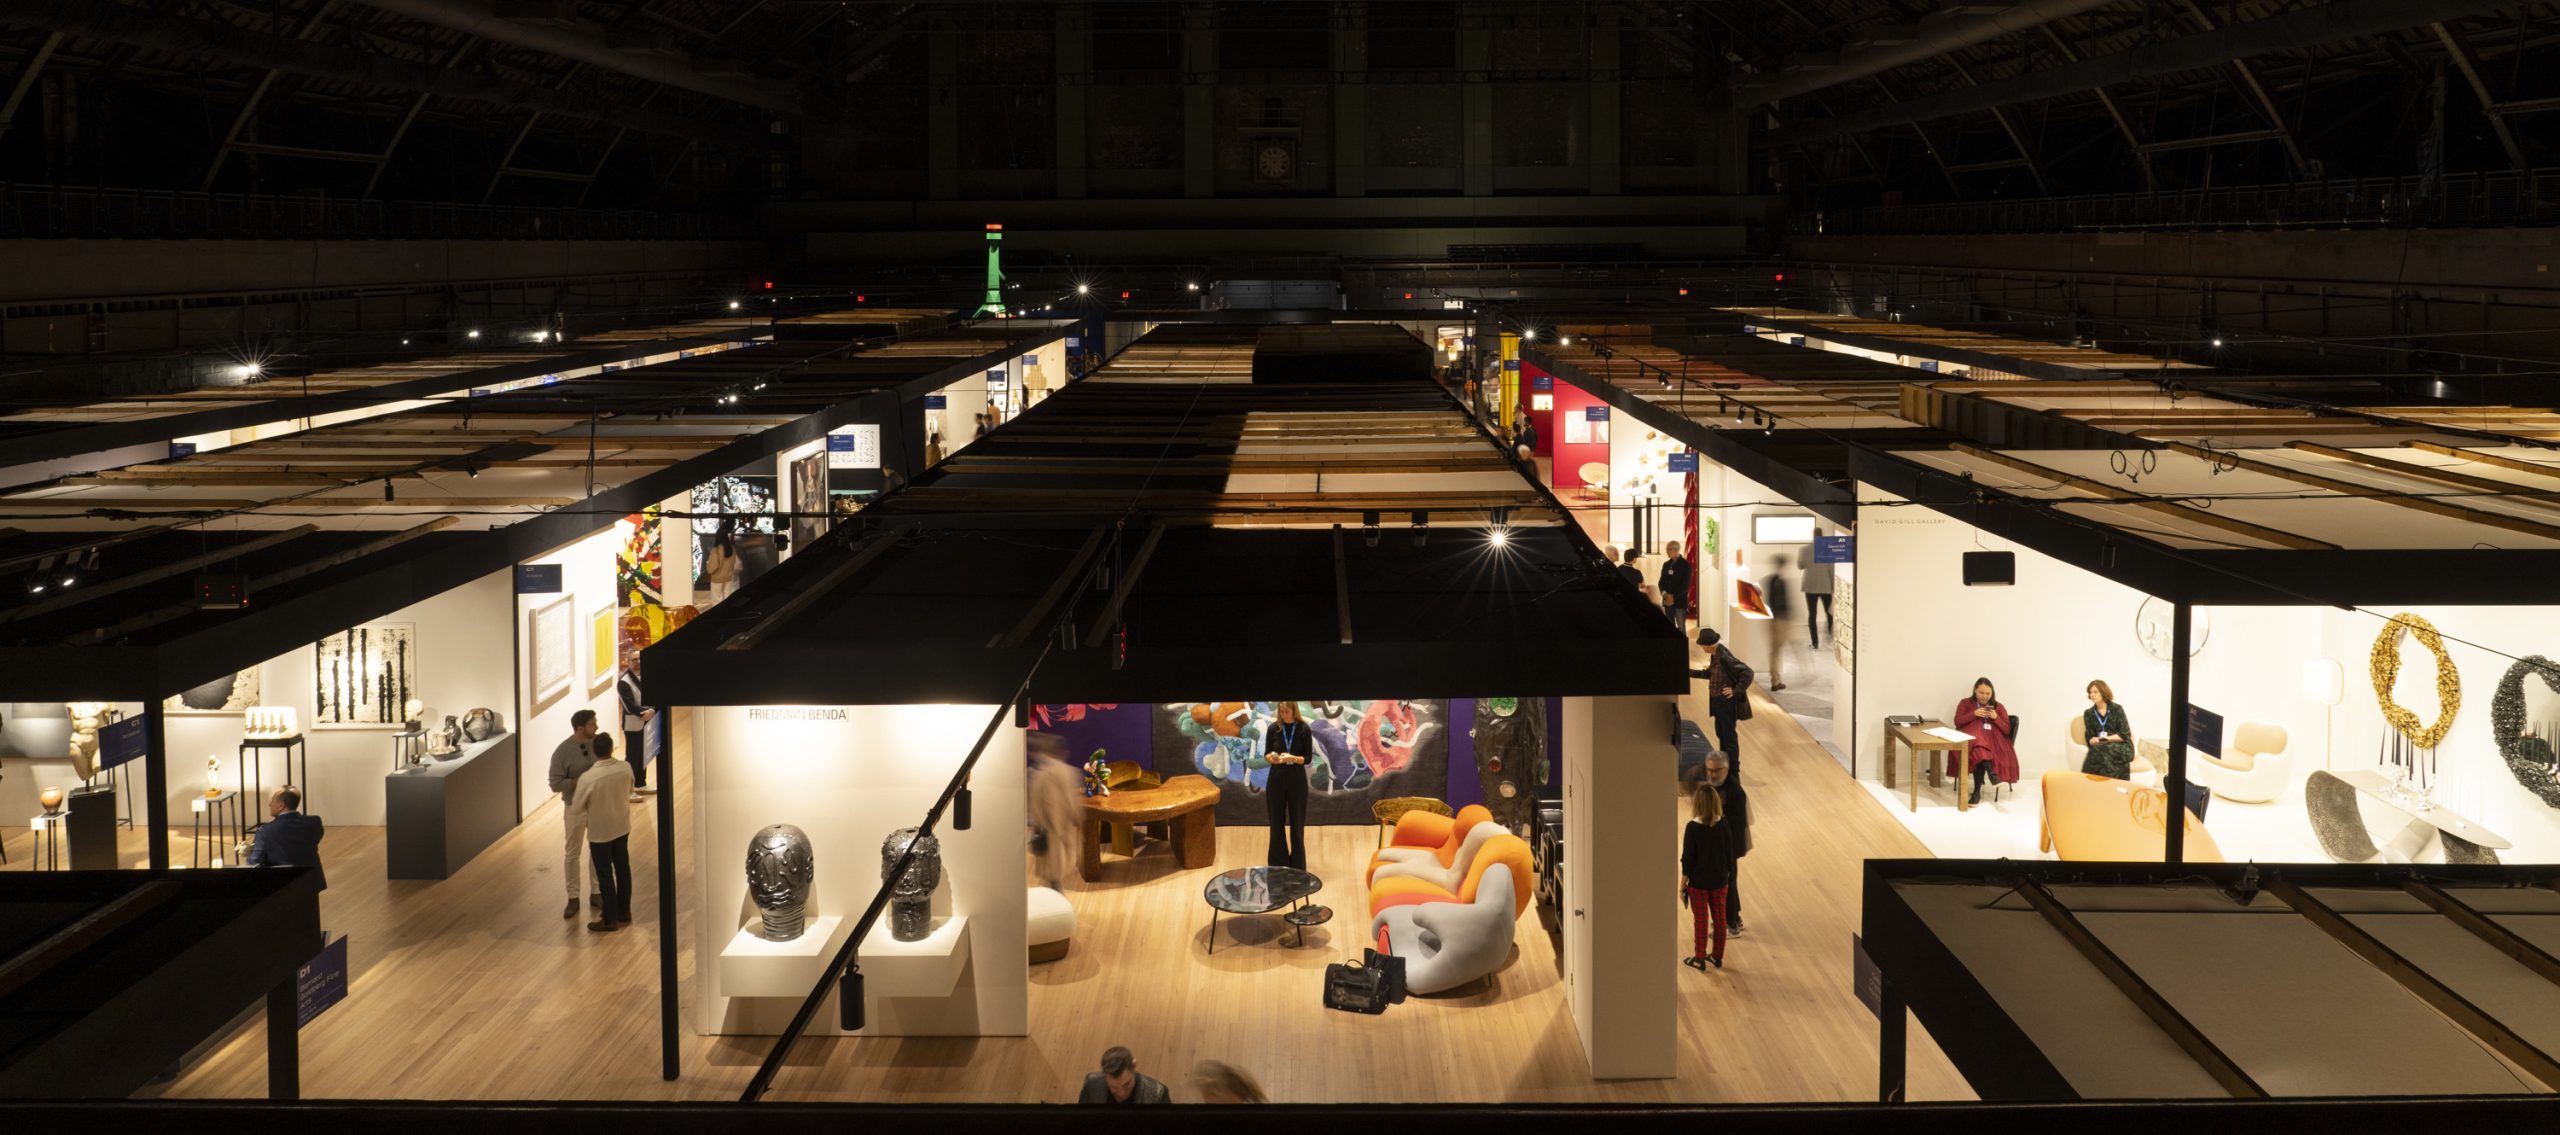 Salon Art + Design booths in the Park Avenue Armory's Wade Thompson Drill Hall in 2022